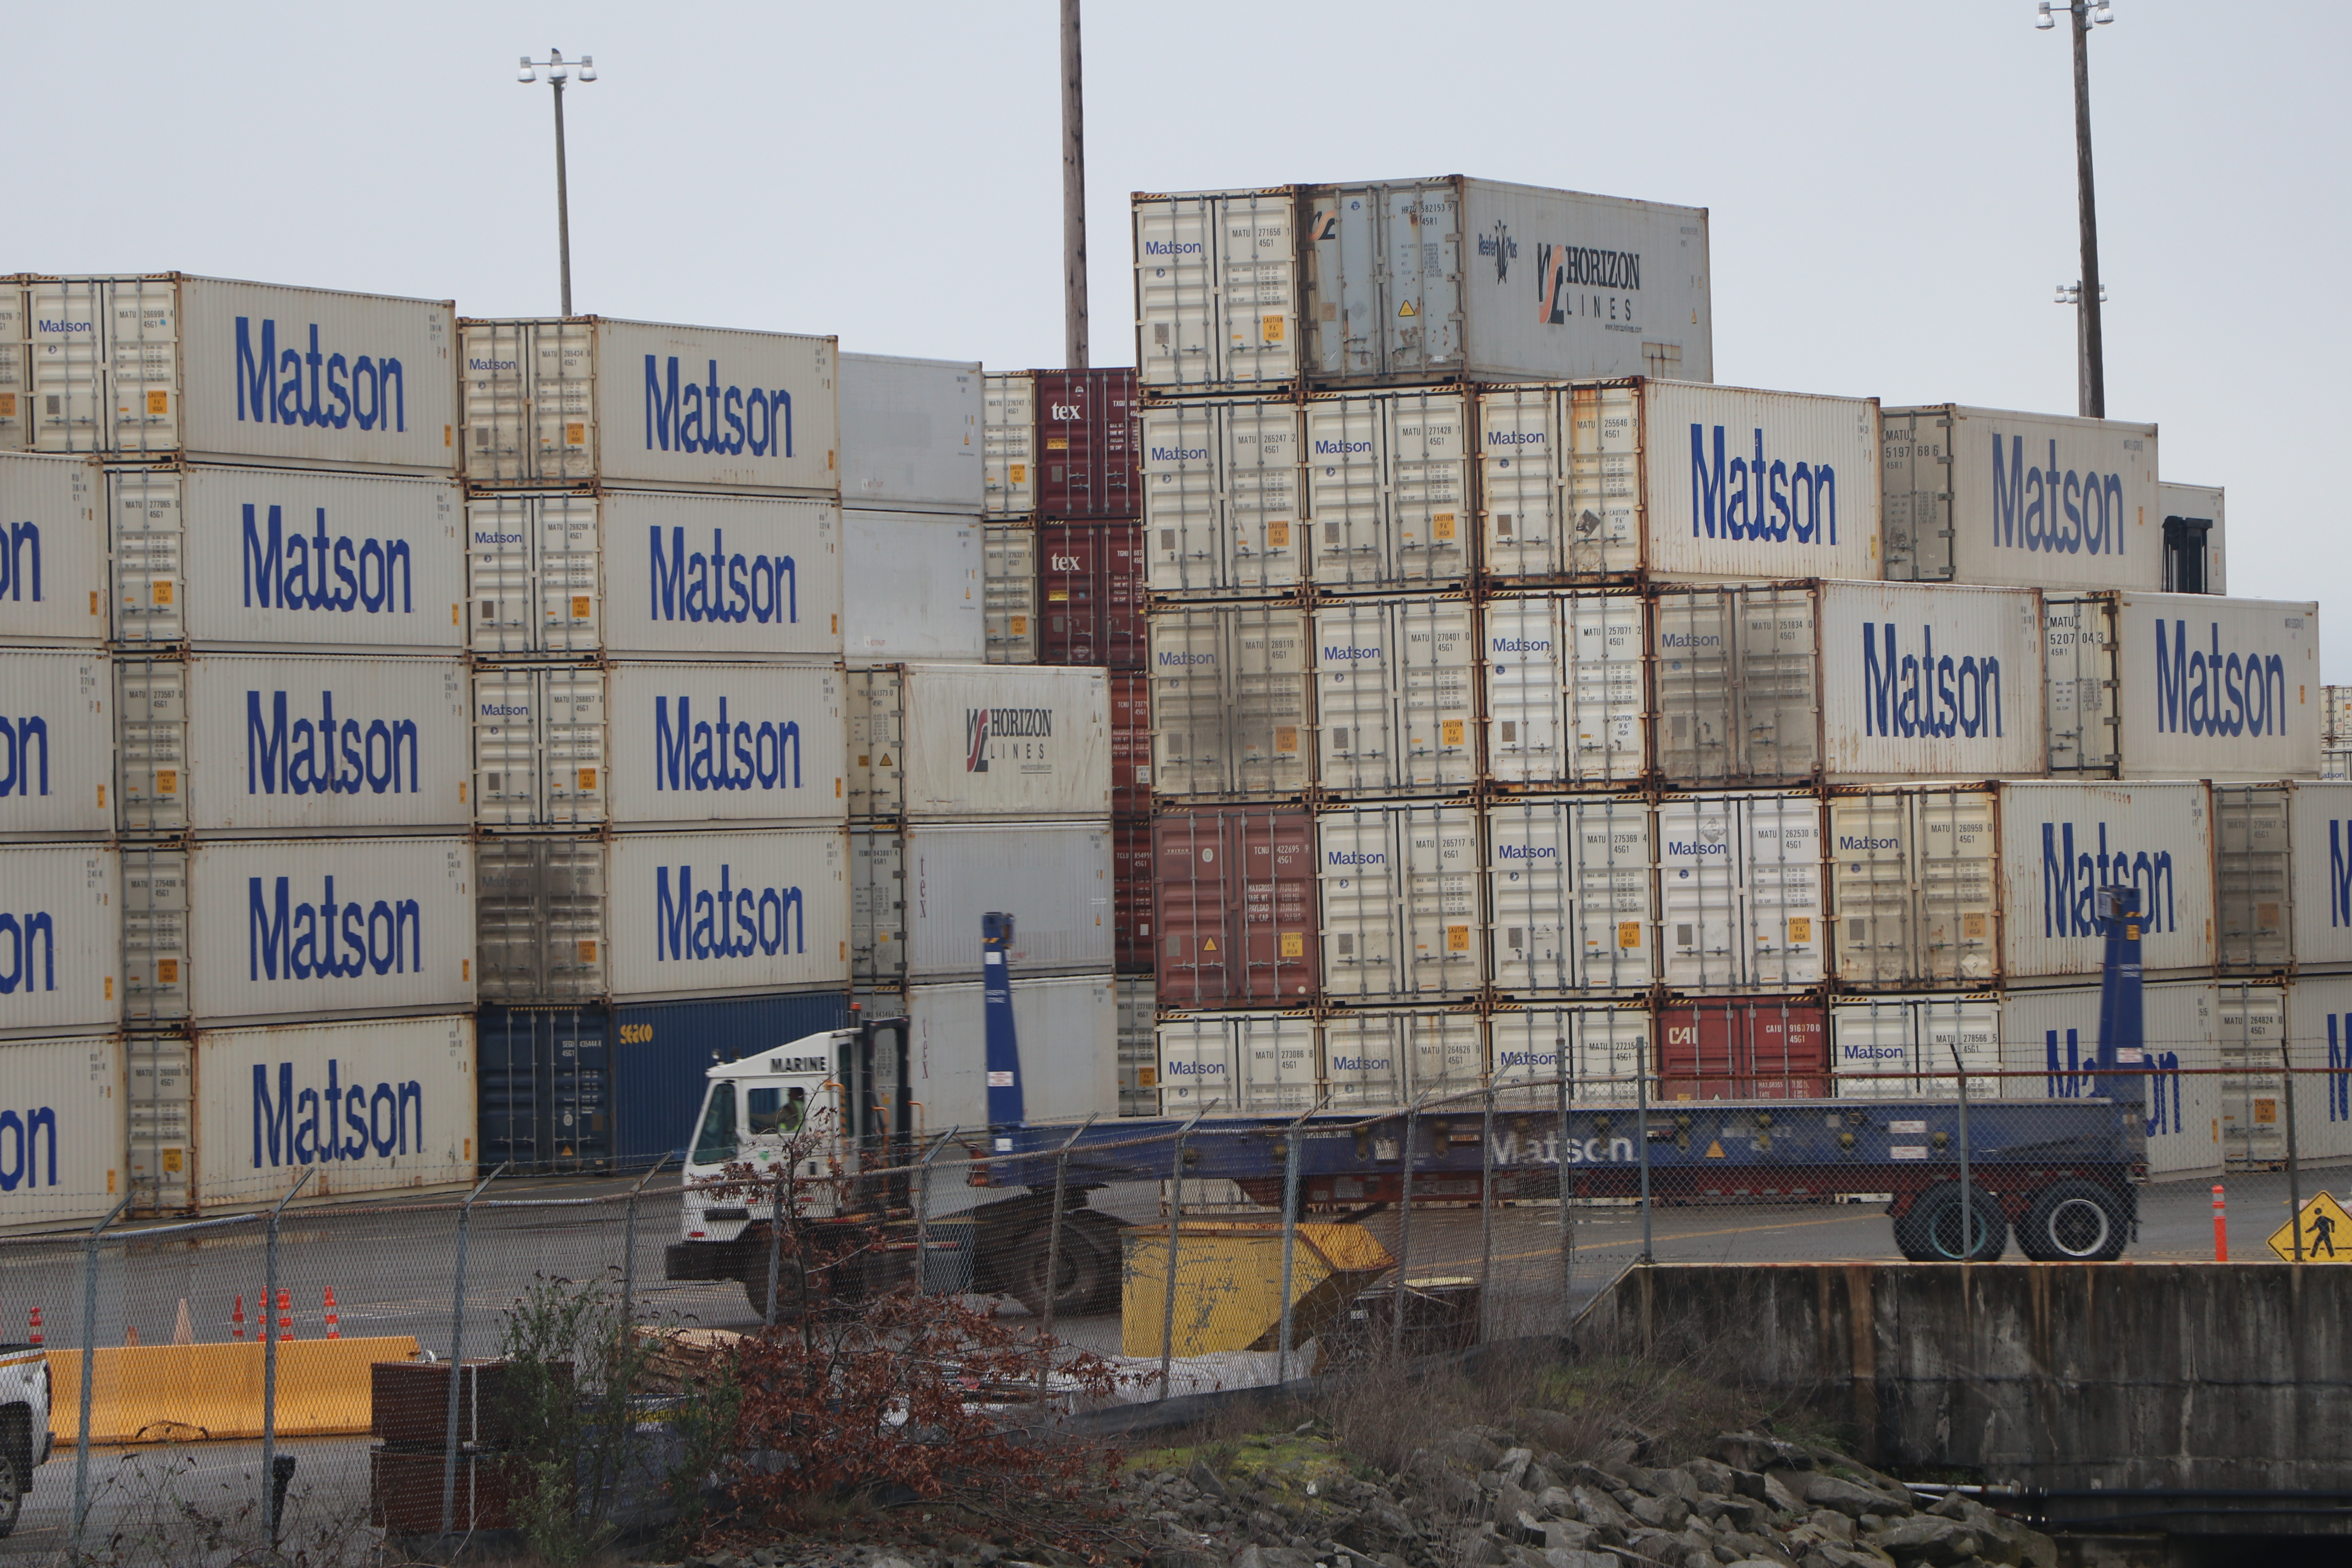 Image showing port shipping containers stacked on one another